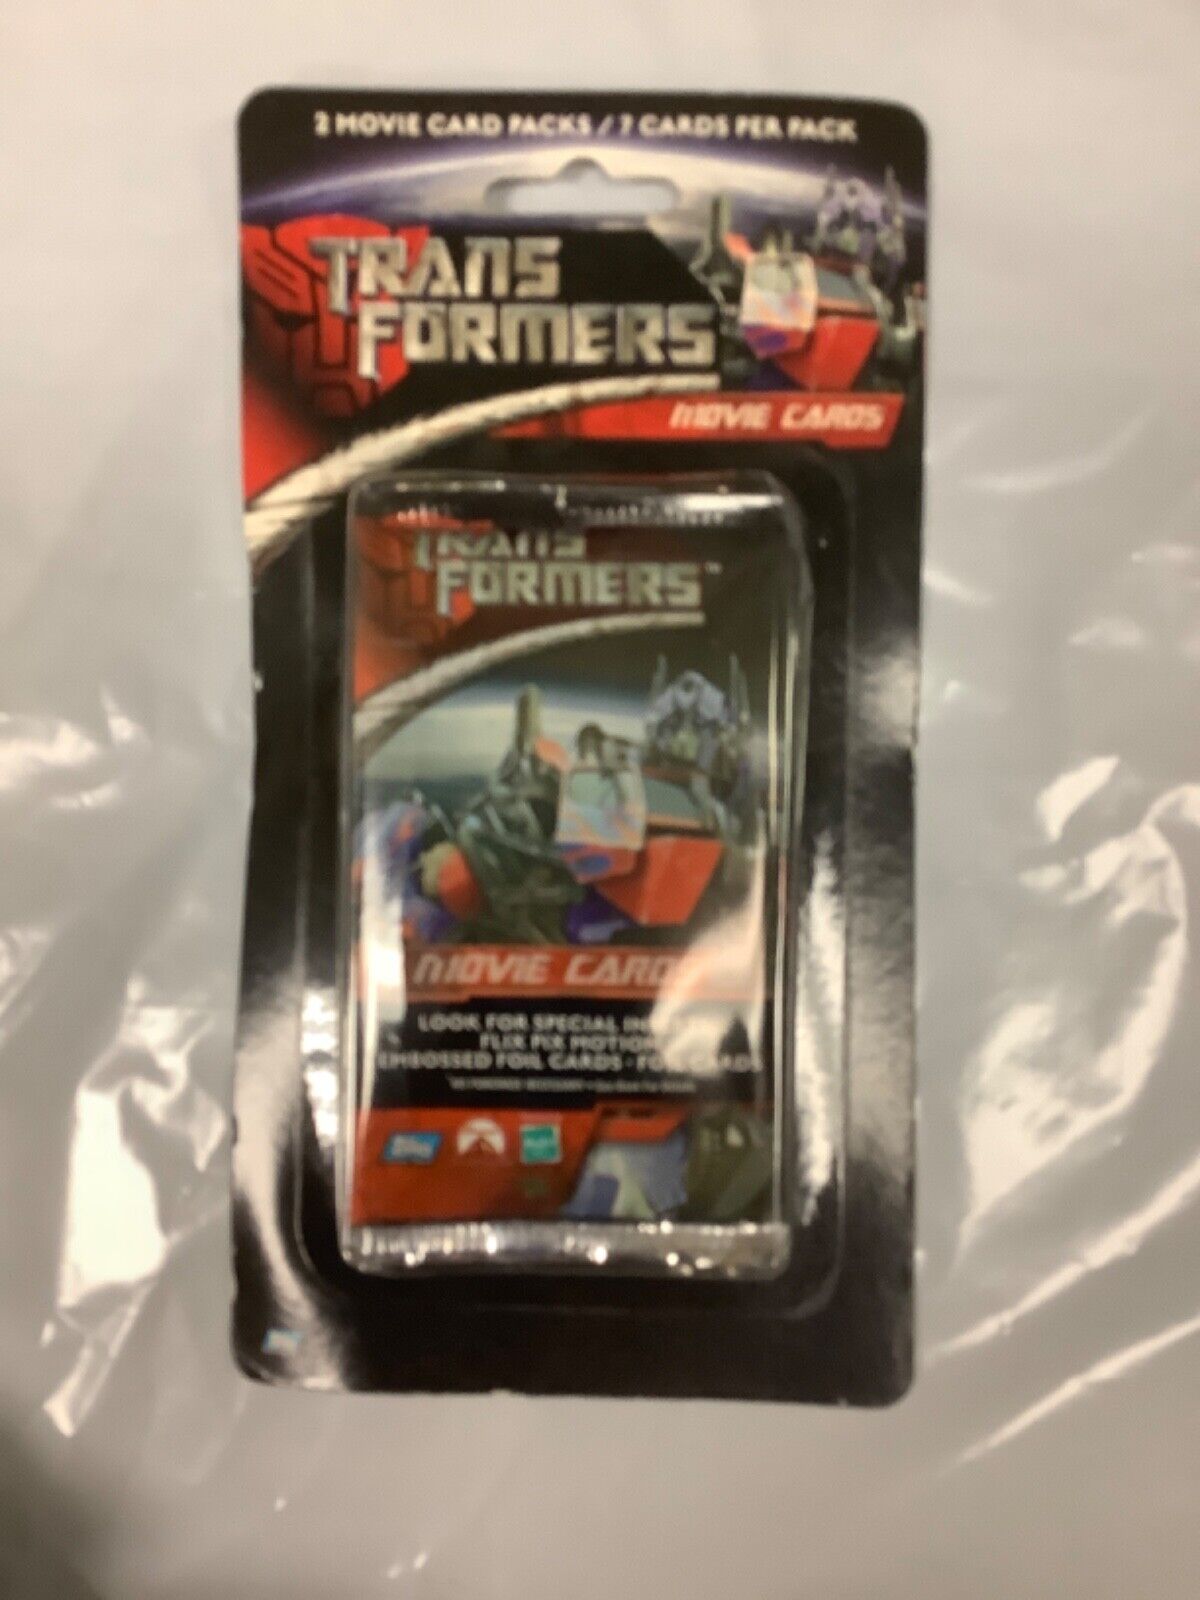 Topps Hasbro 2007 Transformers Movie Cards 2 Packs/7 Cards Each NEW